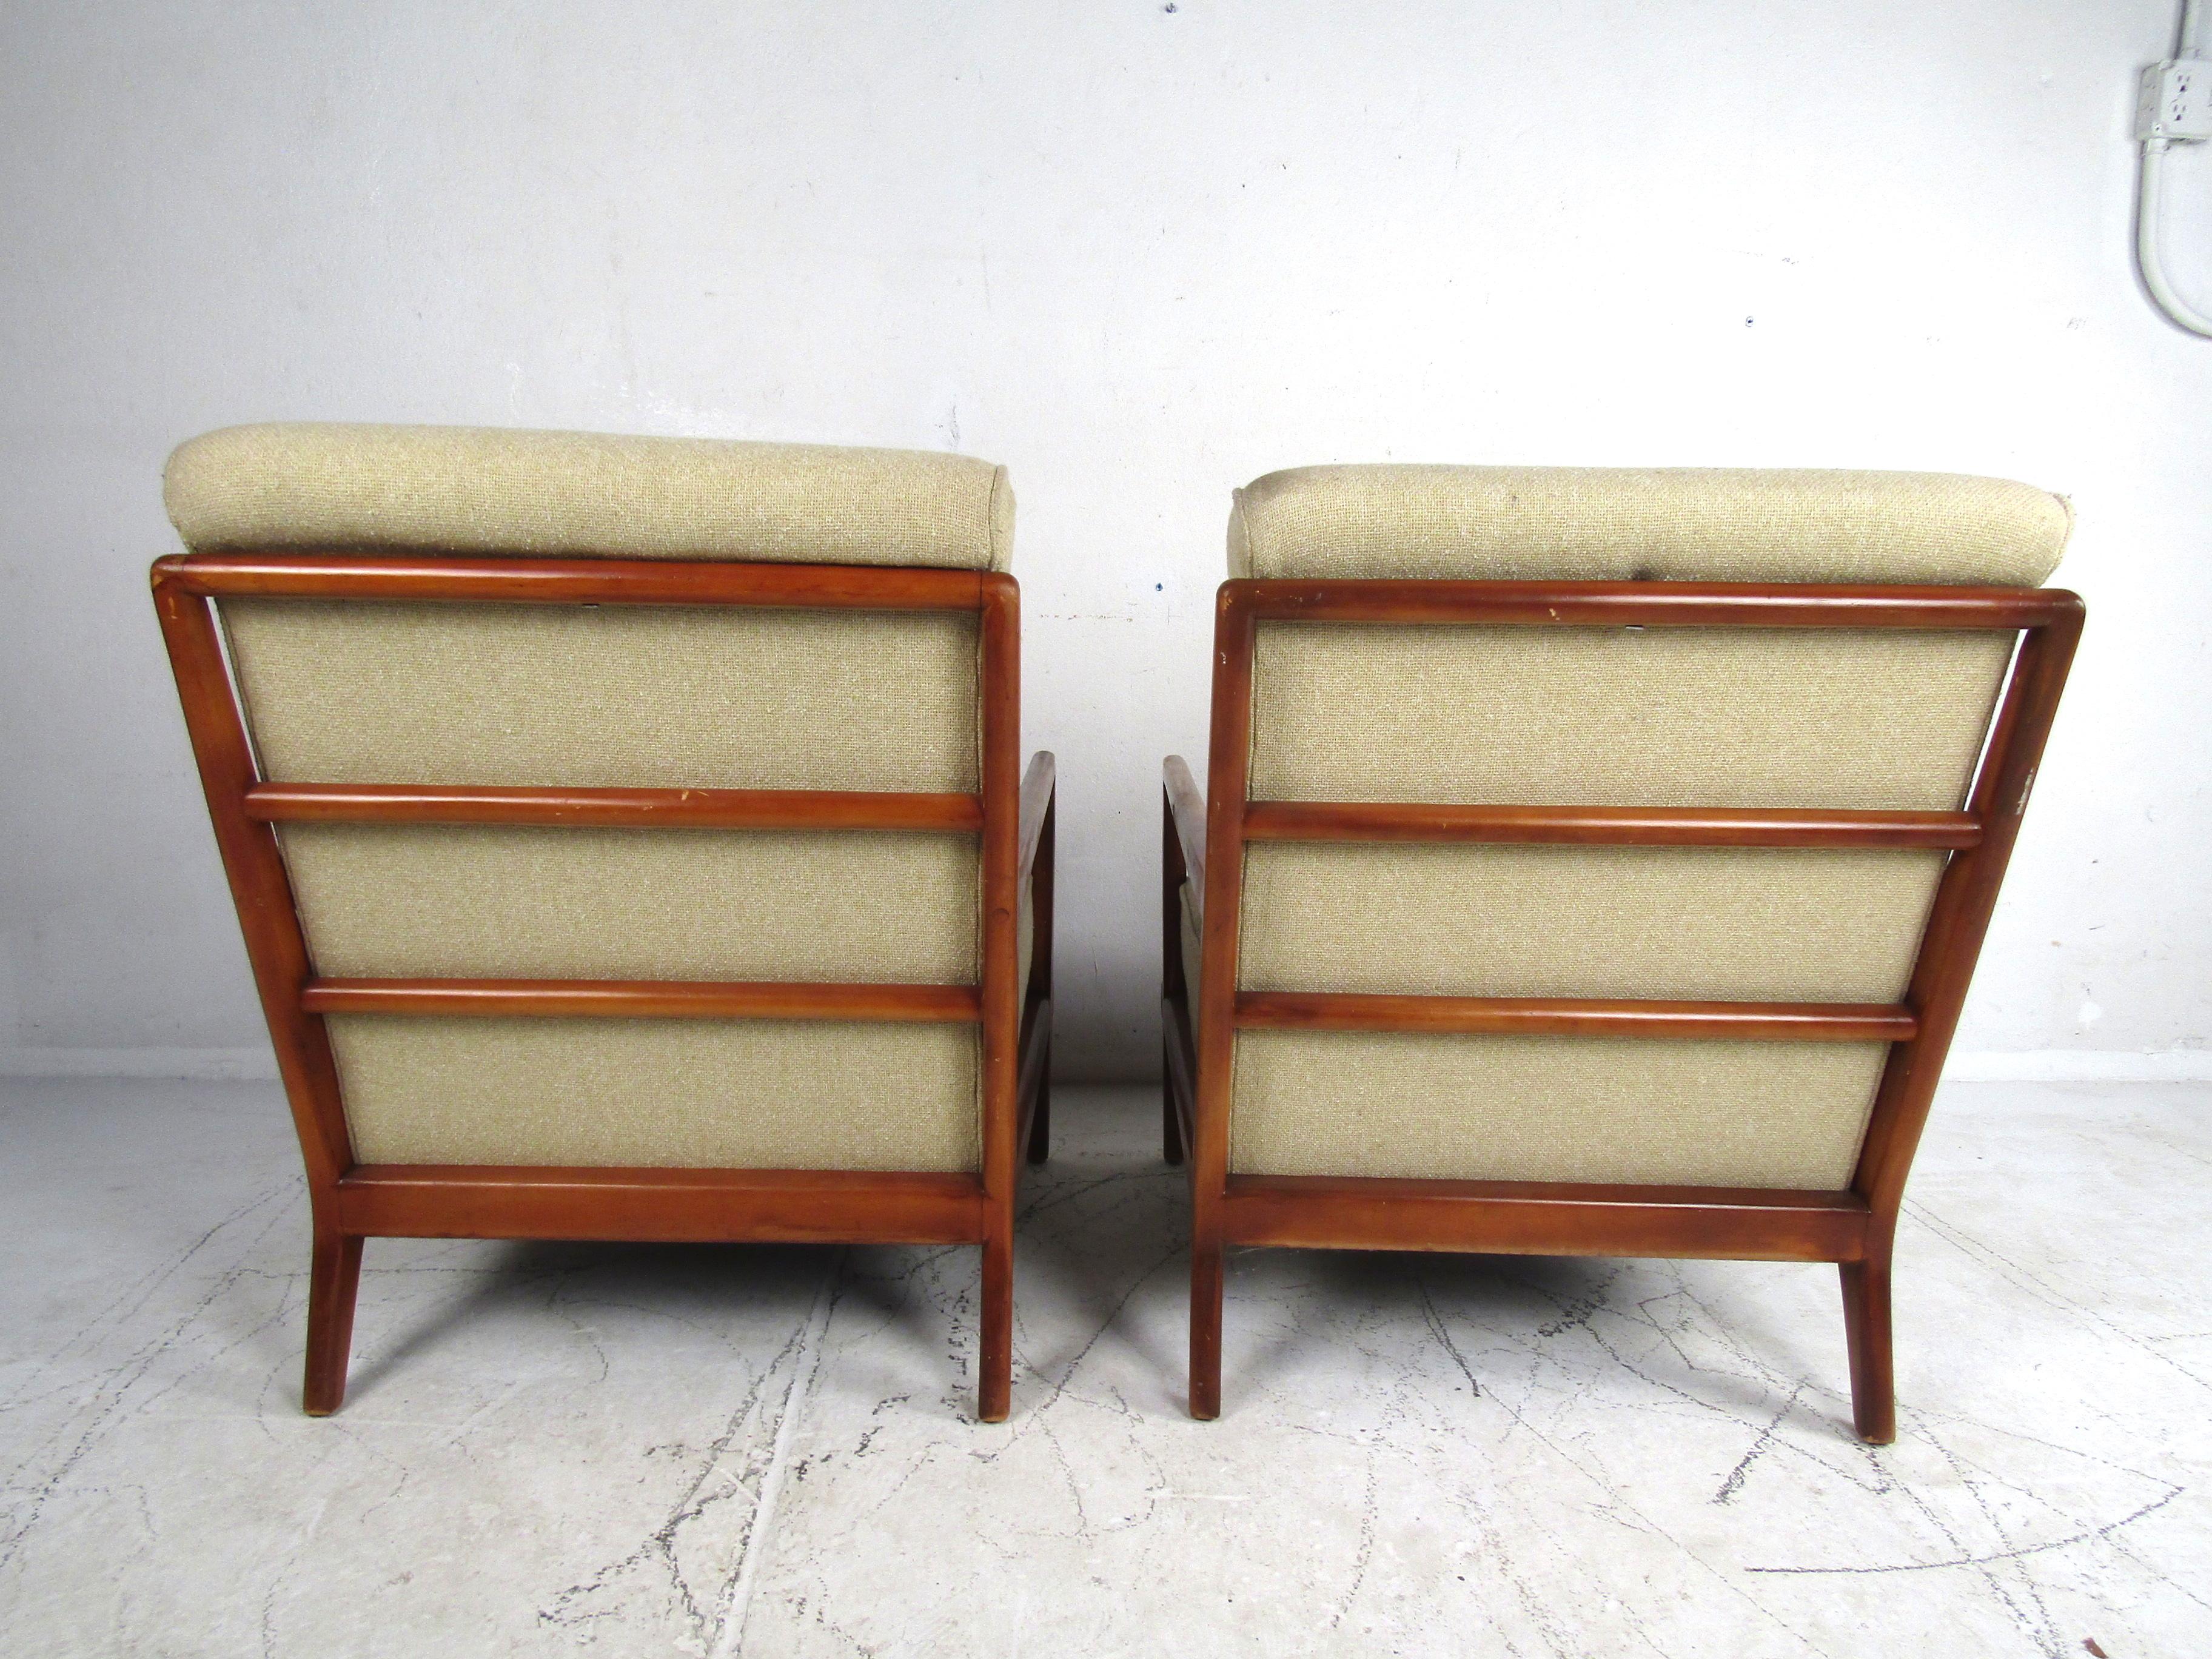 American Midcentury Widdicomb Lounge Chairs, a Pair For Sale